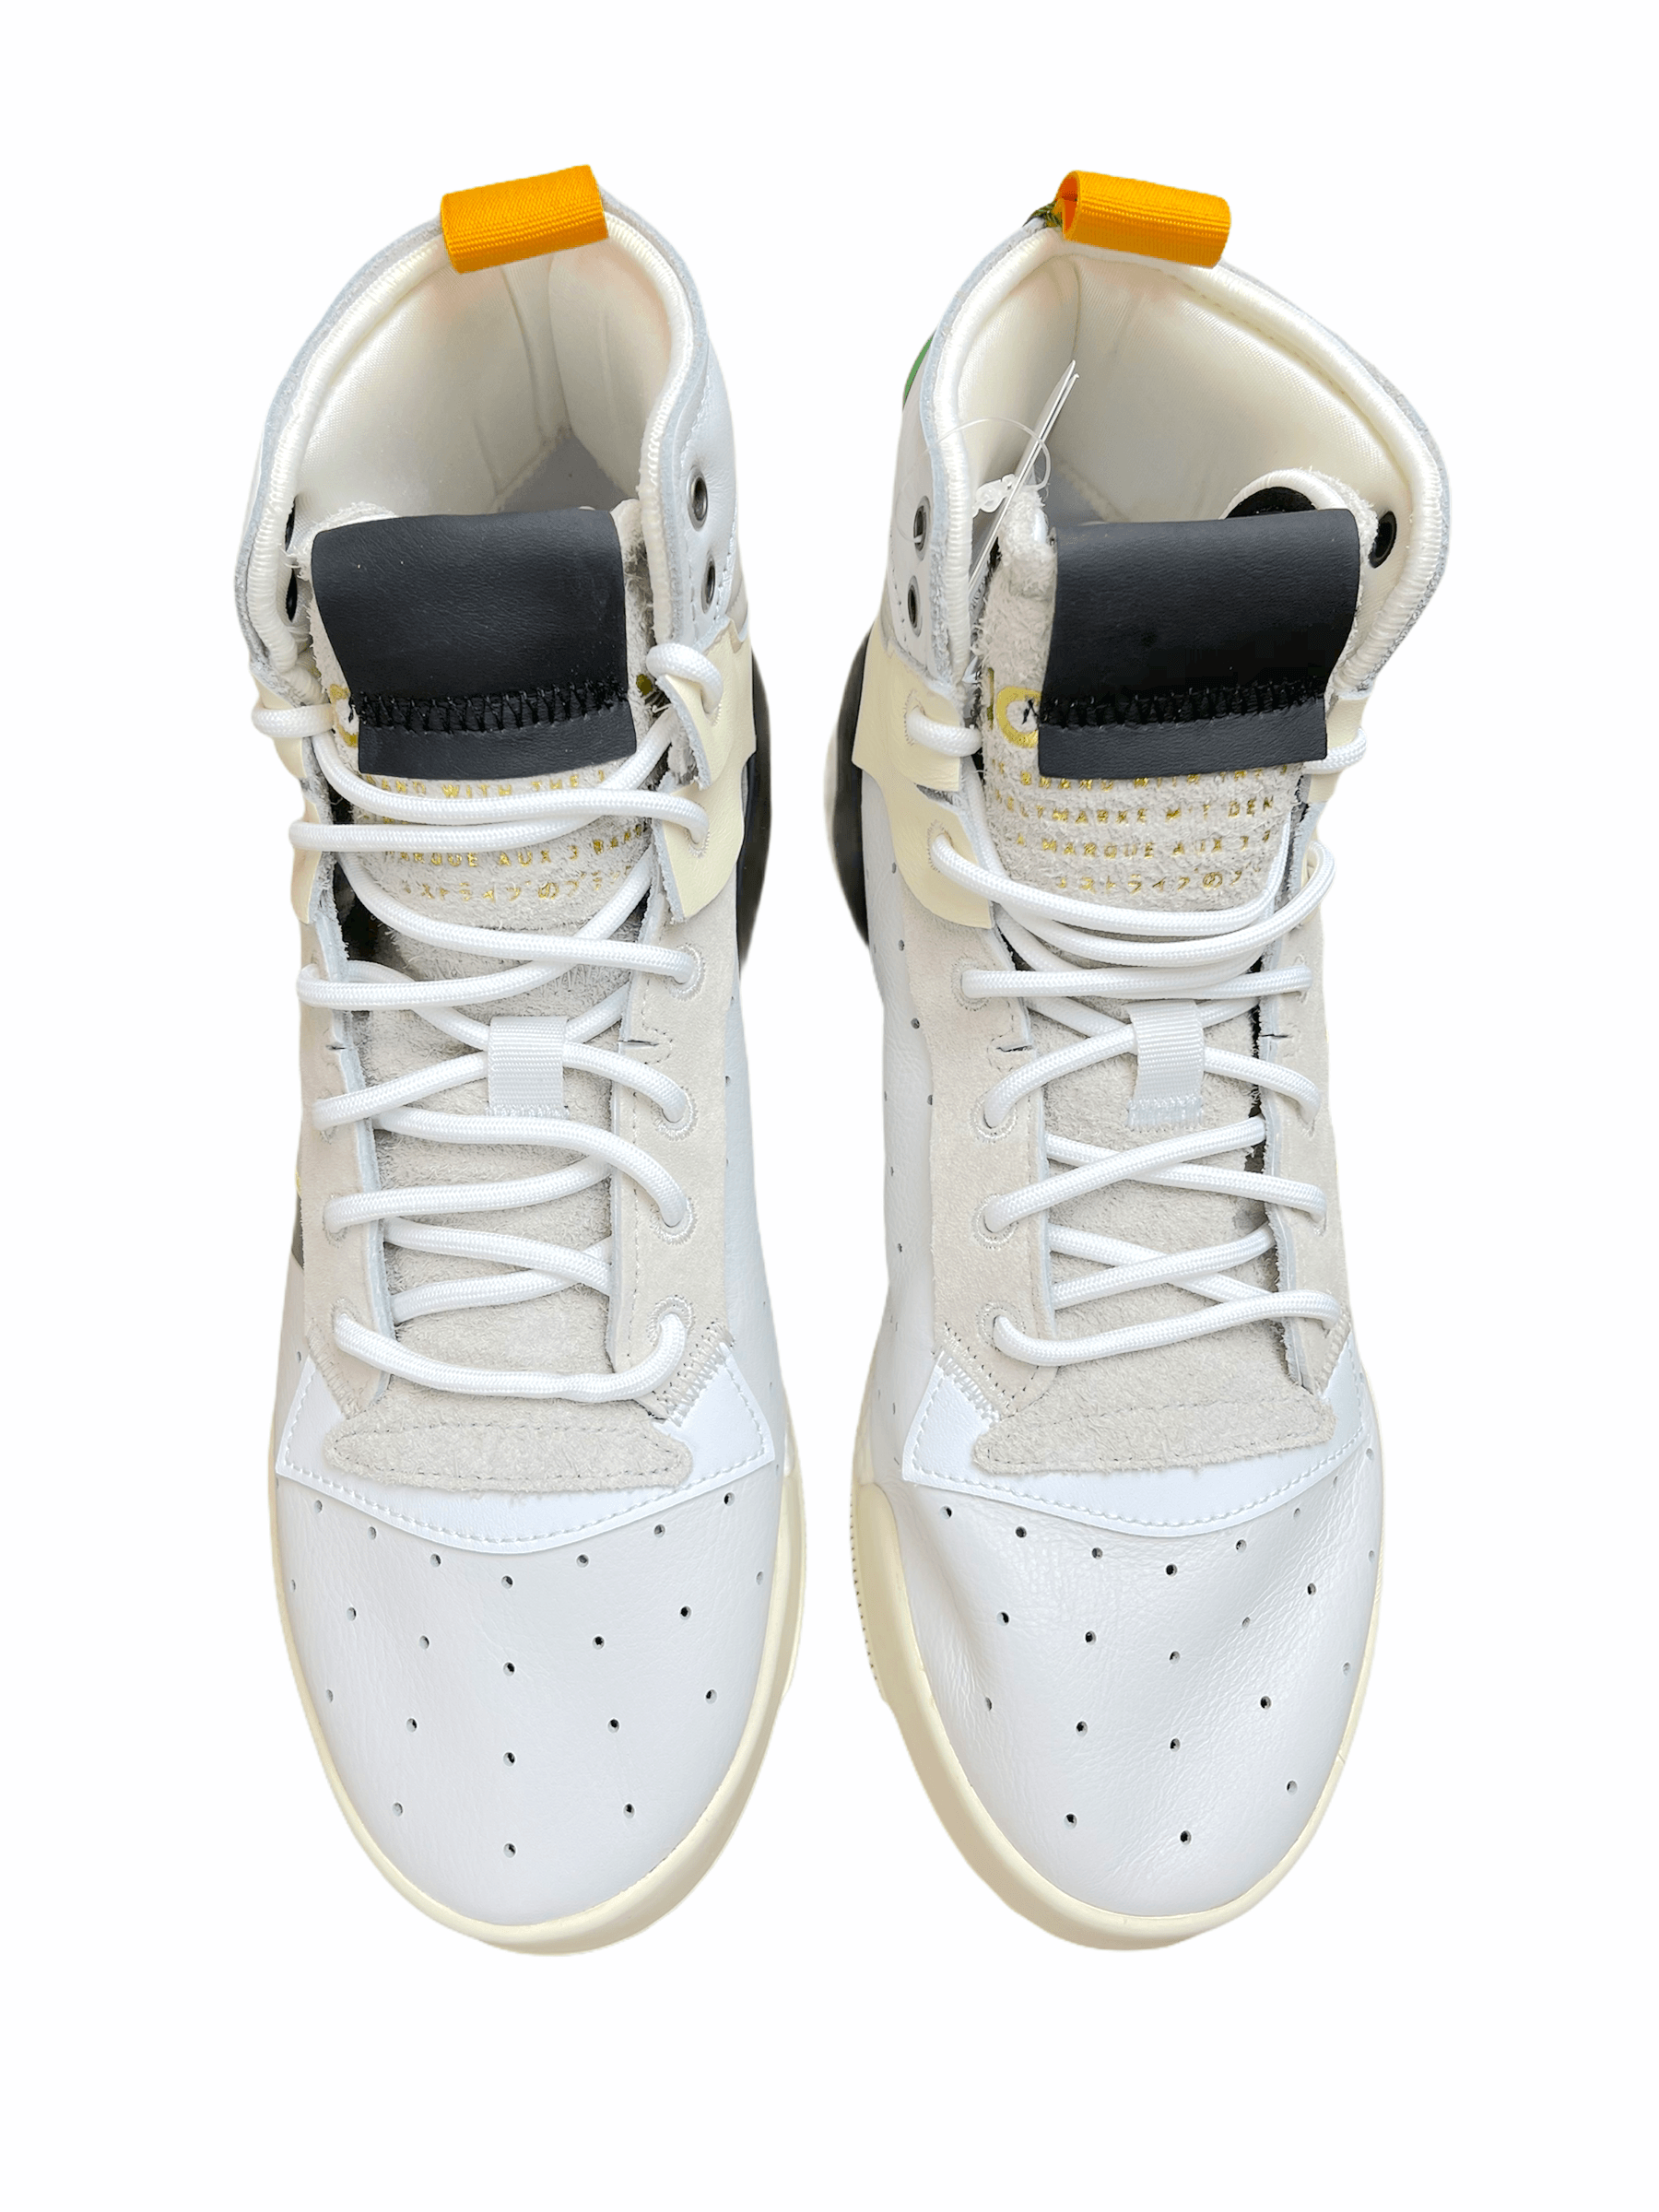 Adidas Rivalry High Top Boost Leather Sneakers 9.5 US—Genuine Design luxury consignment